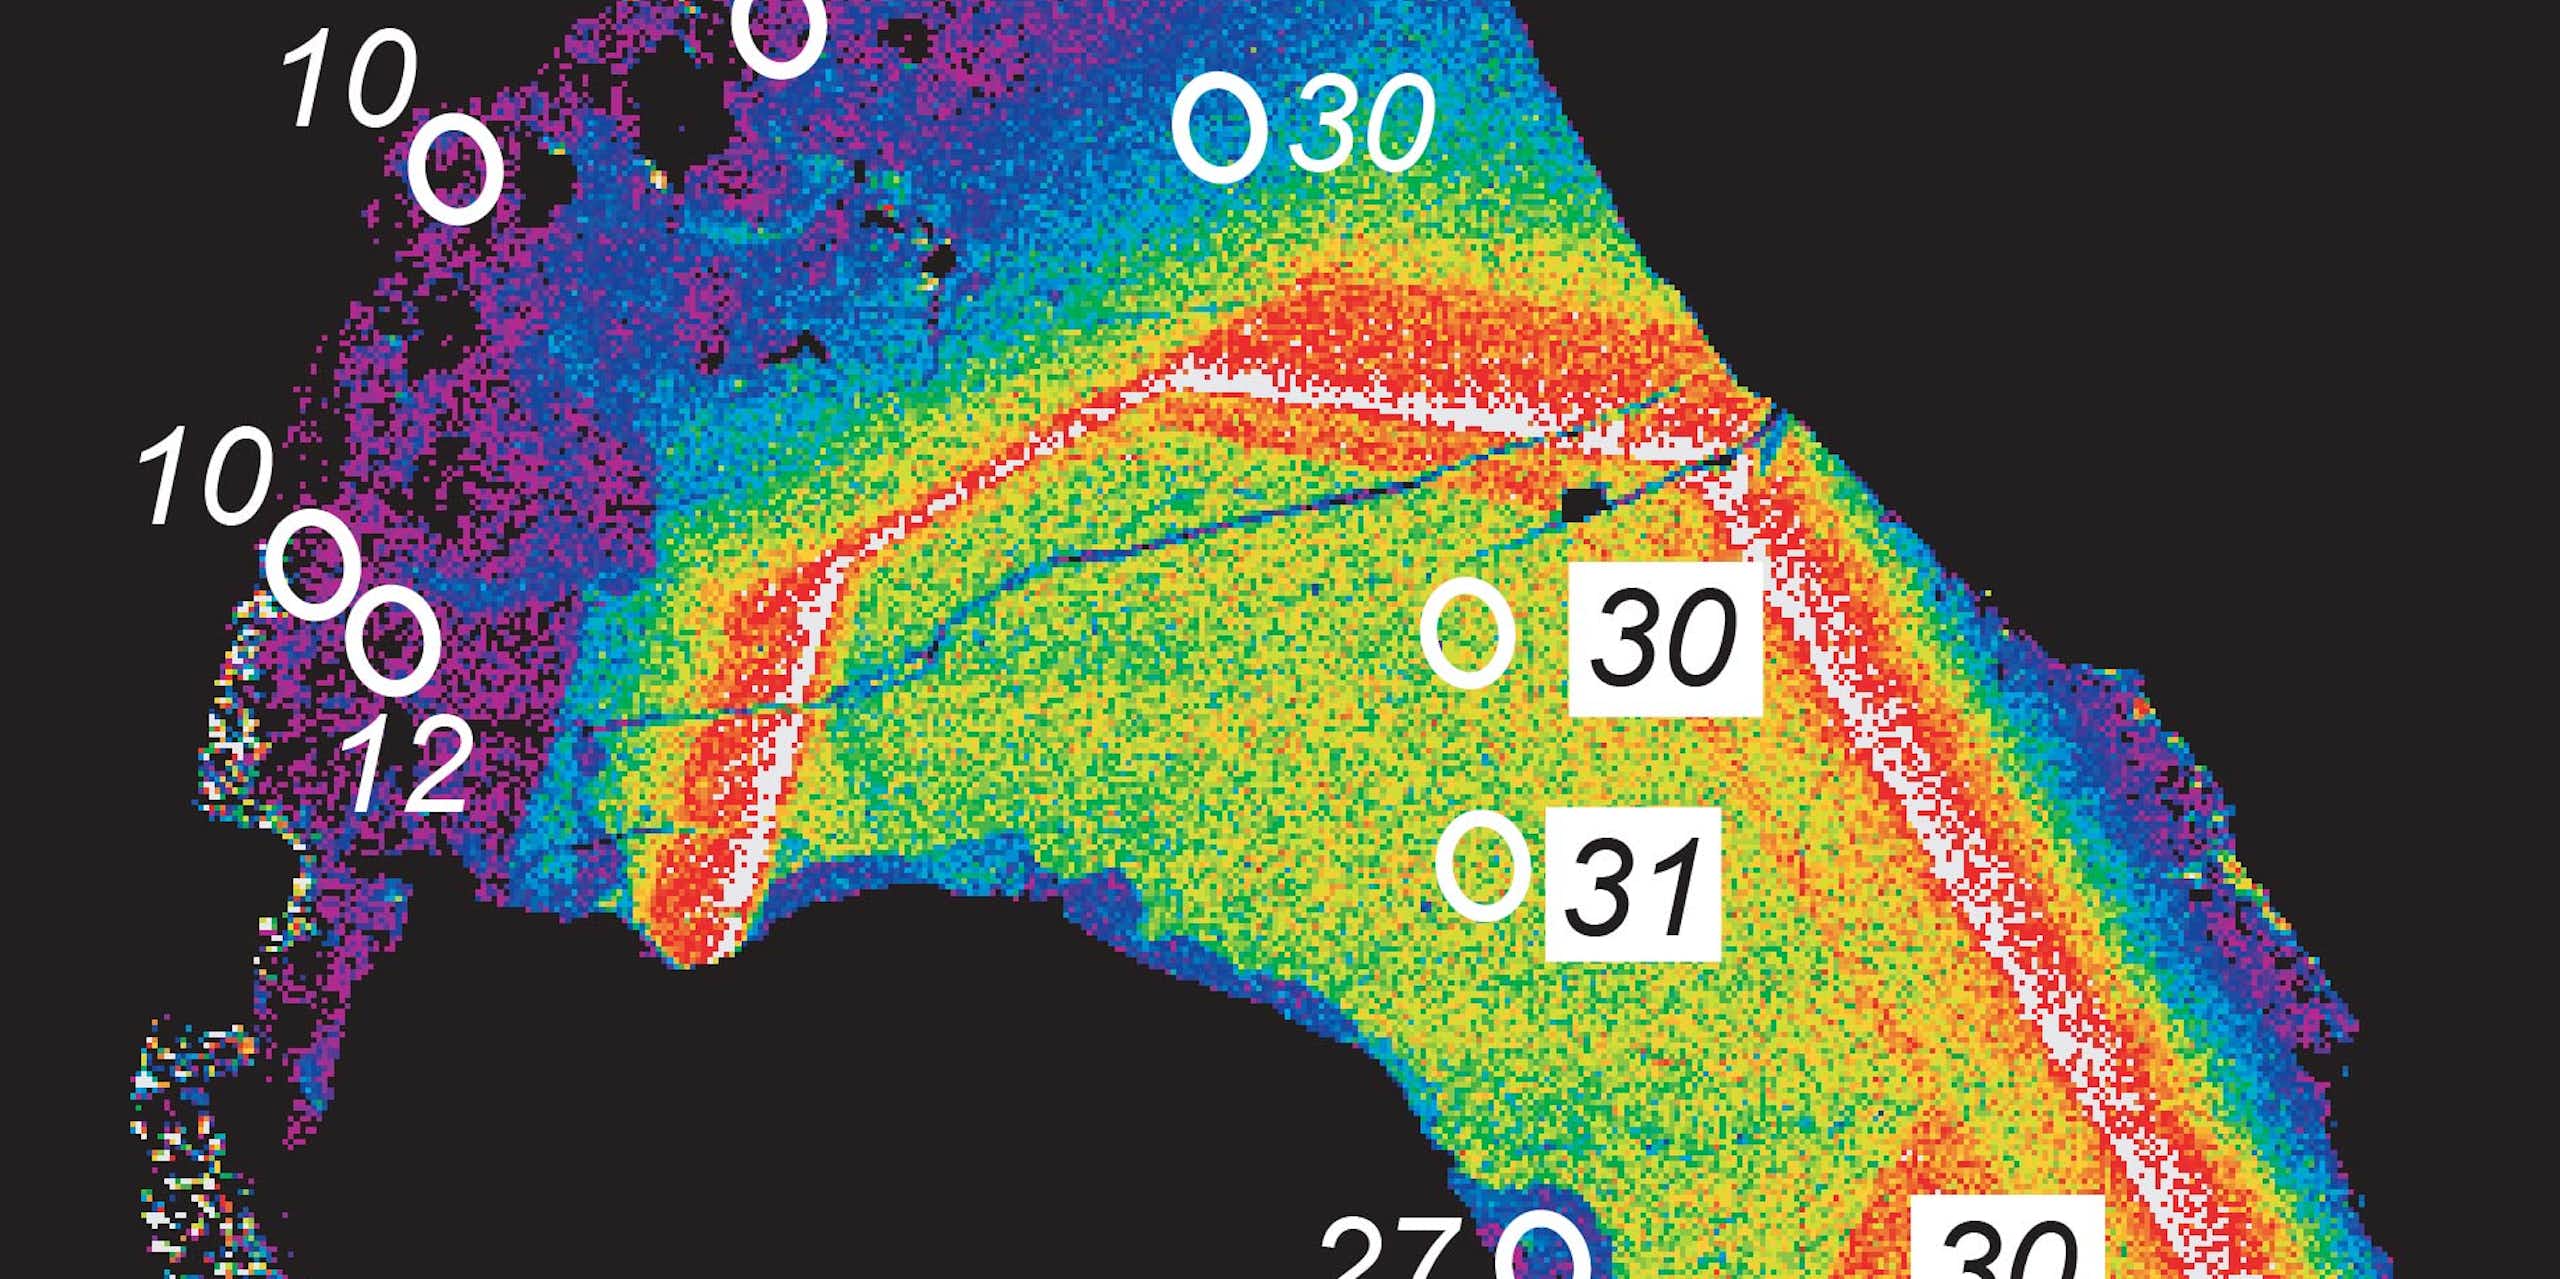 Microscopy heat map of an oblong sliver, with violet at the edges and yellow toward its center, with numbers indicating millions of years superimposed.